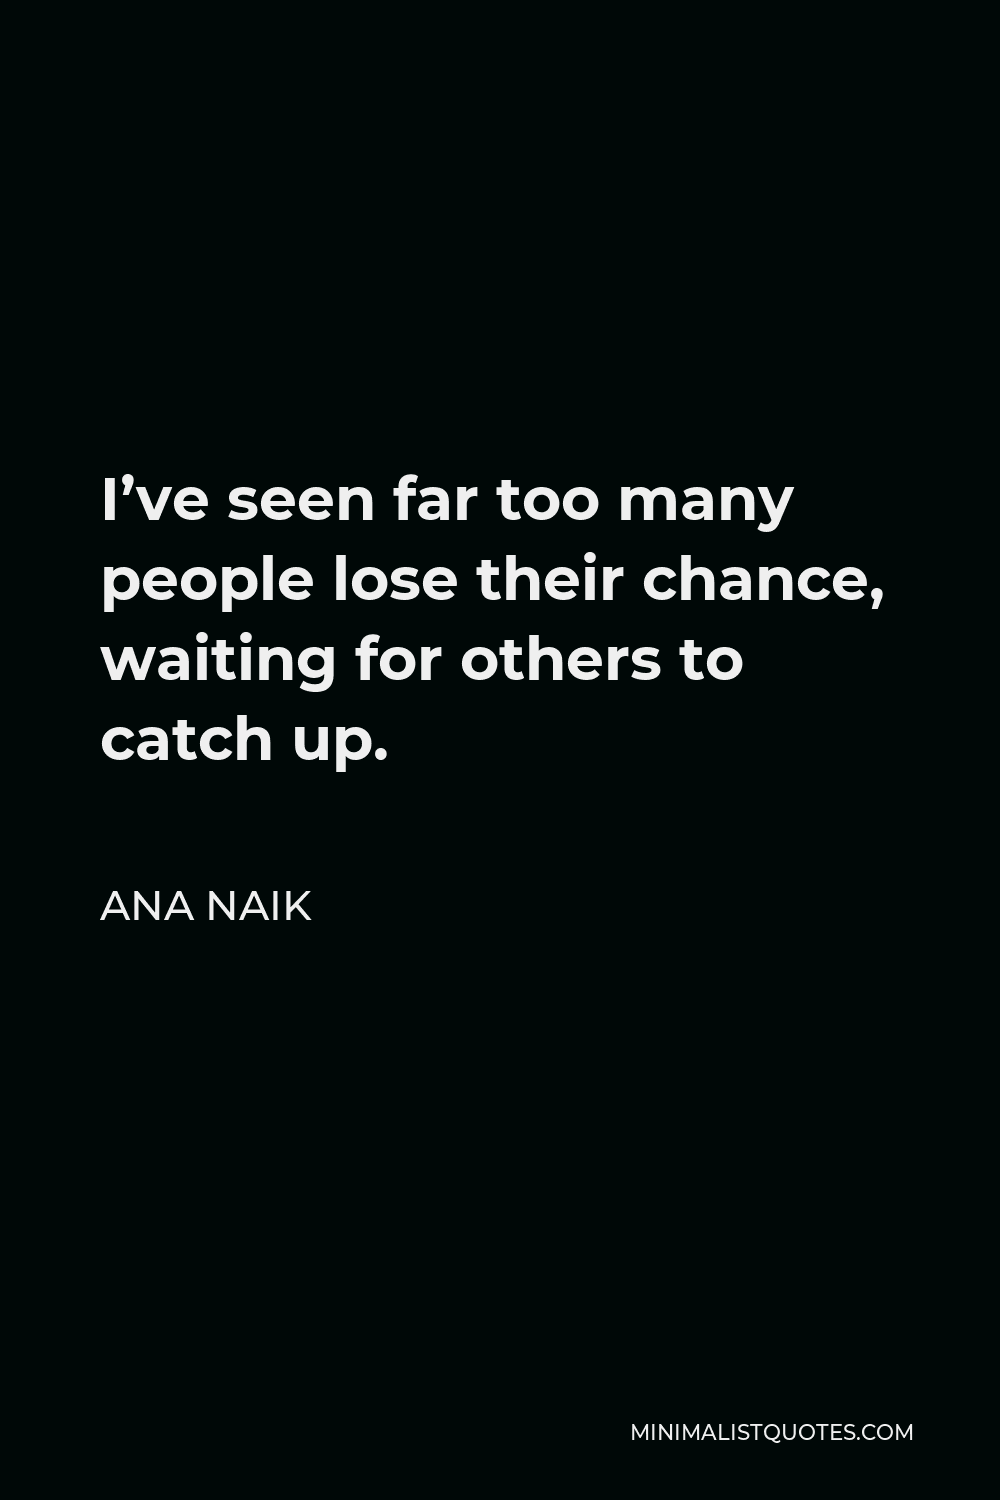 Ana Naik Quote - I’ve seen far too many people lose their chance, waiting for others to catch up.